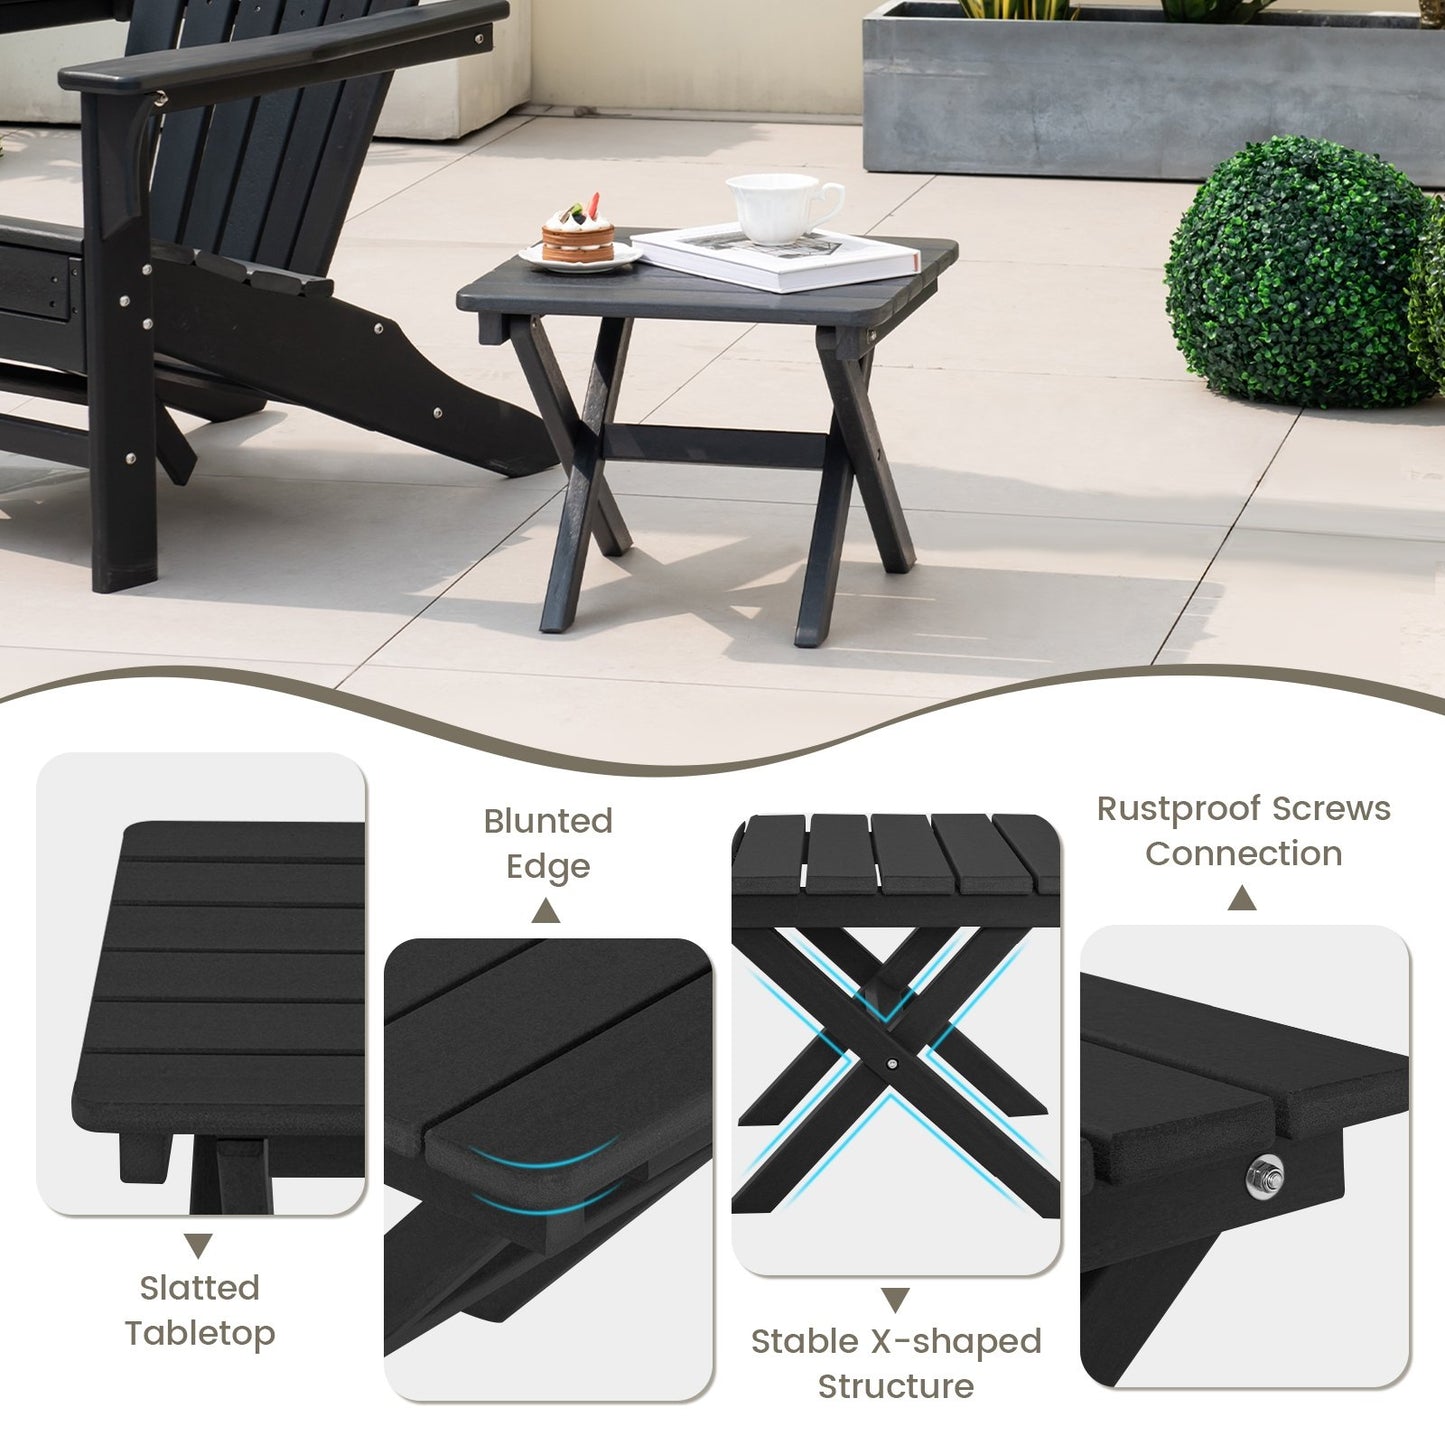 Outdoor Folding Side Table Foldable Weather-Resistant HDPE Adirondack Table, Black - Gallery Canada